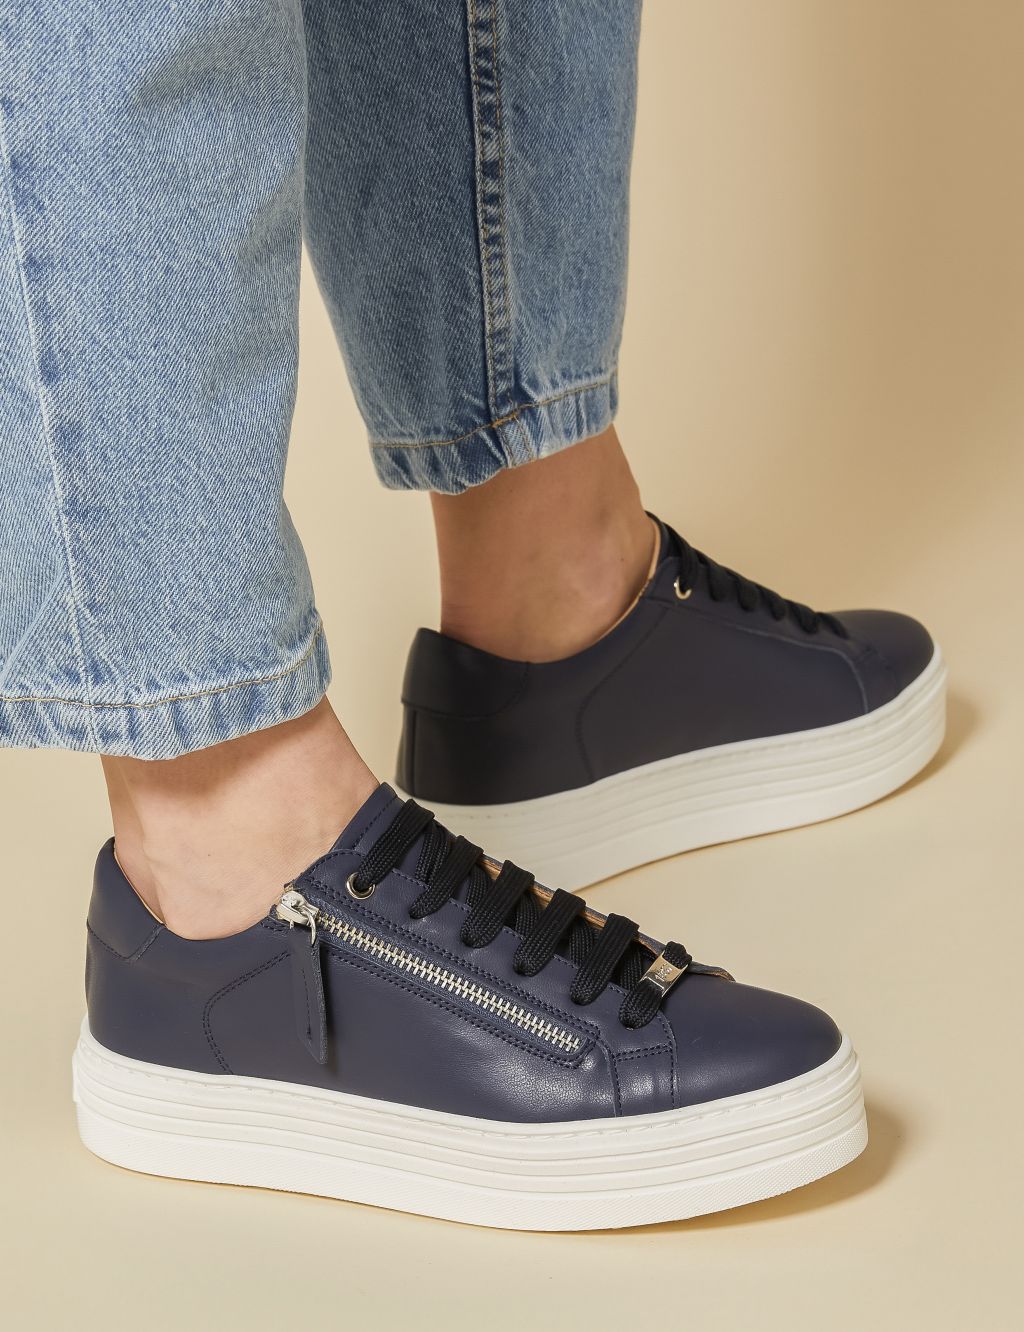 Leather Lace Up Flatform Trainers image 1